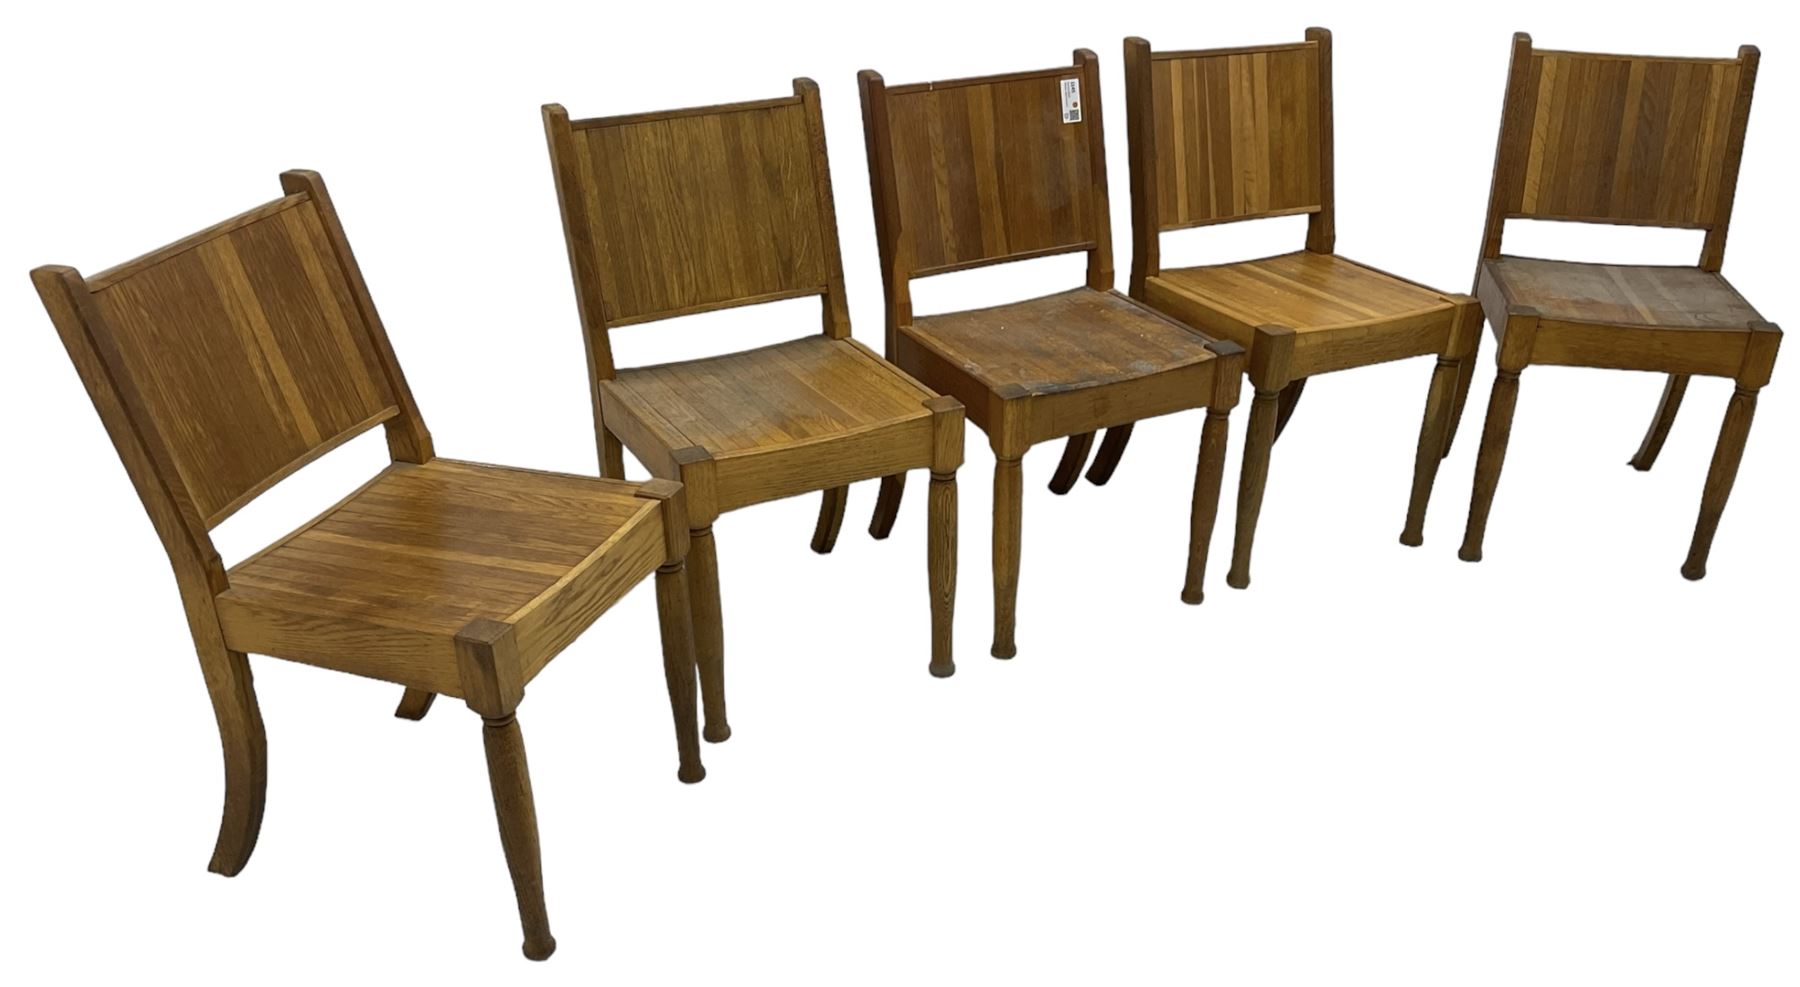 Set of five 20th century oak chairs - Image 4 of 6